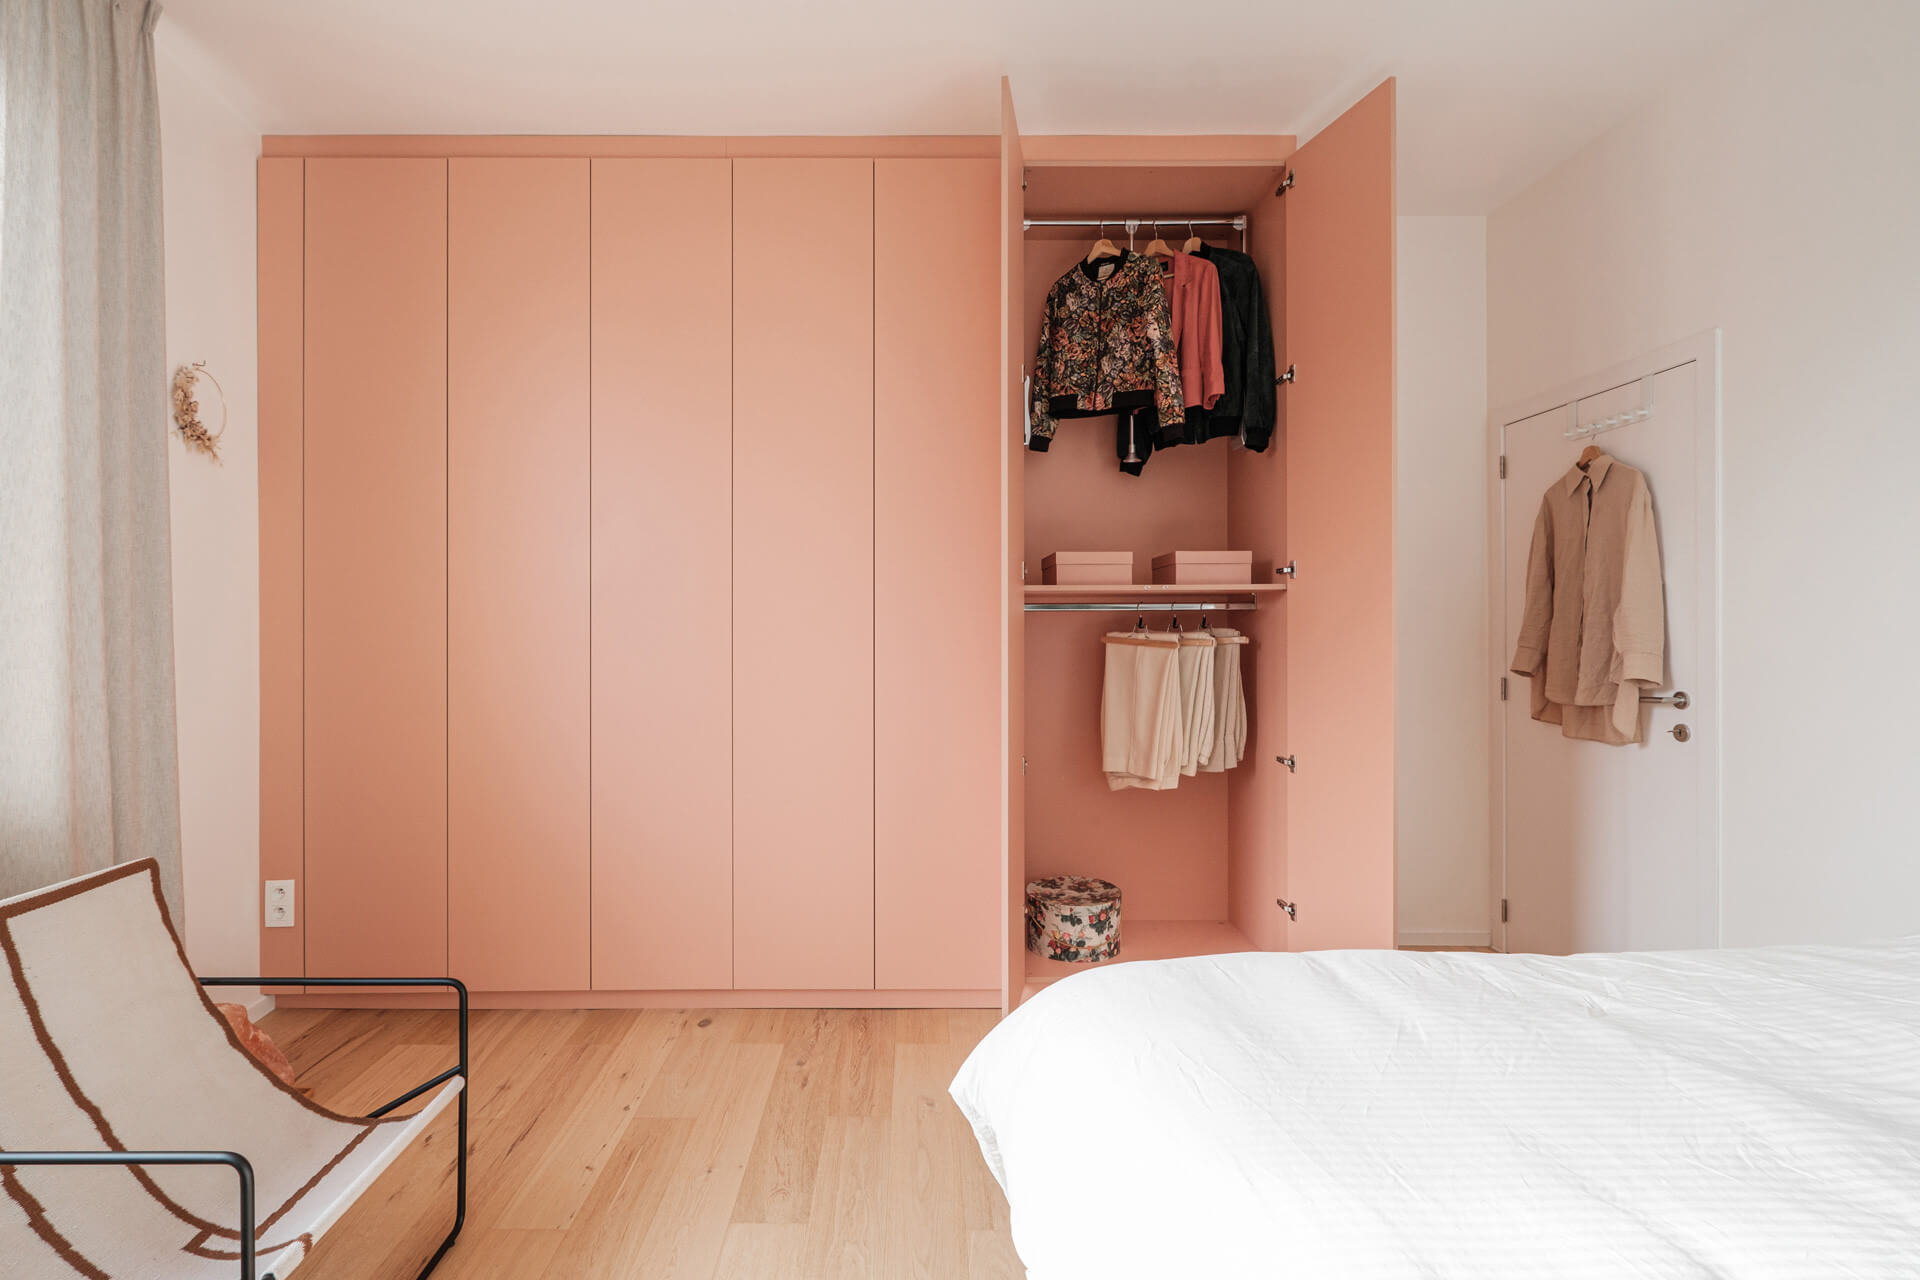 Custom wardrobe in the color Dusty Coral